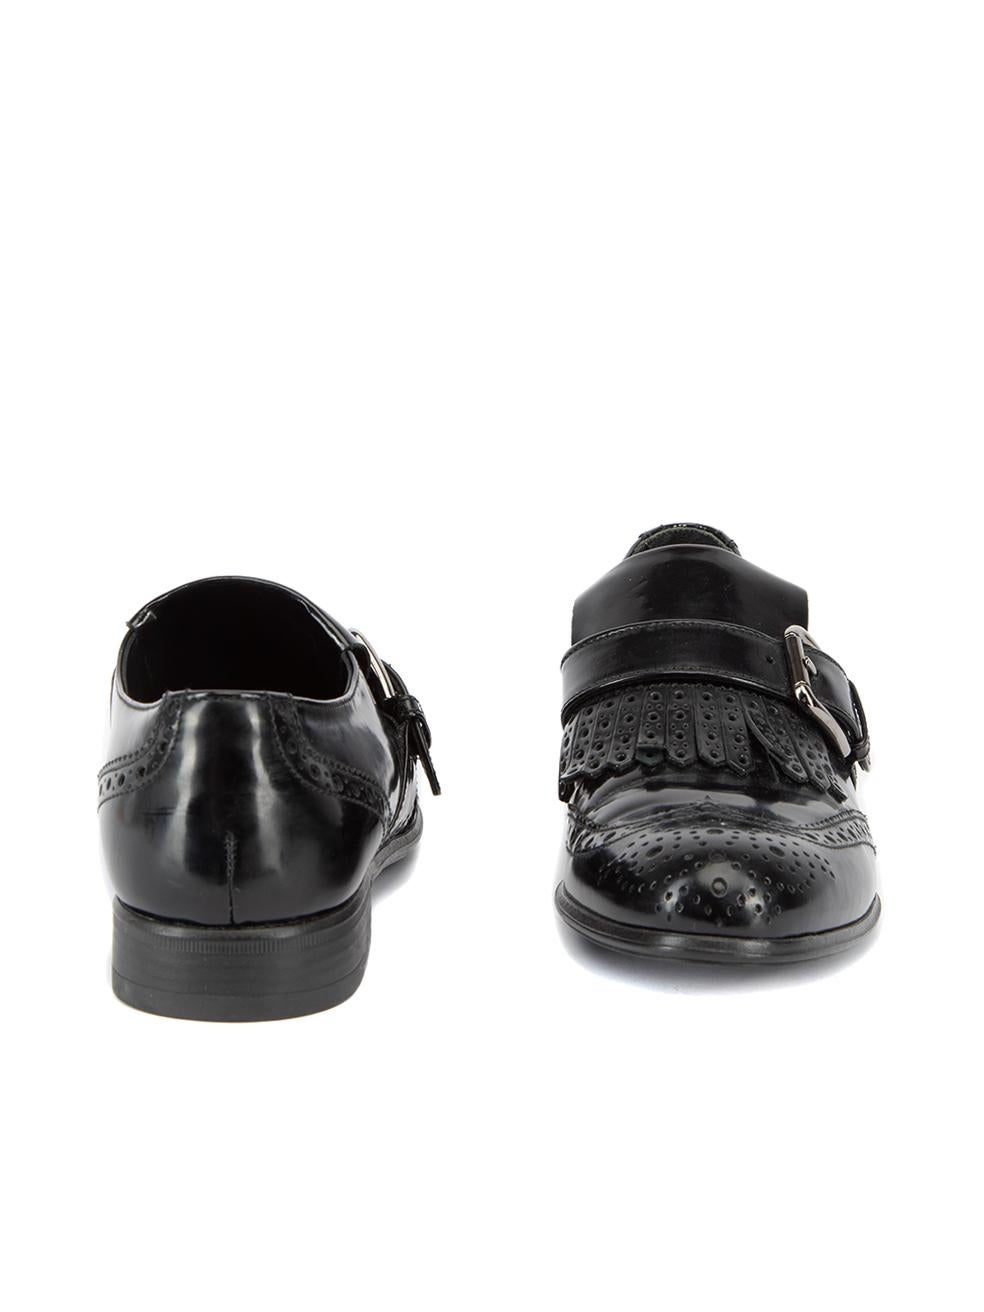 Pre-Loved Dolce & Gabbana Women's Black Patent Leather Buckle Accent Brogues In Excellent Condition For Sale In London, GB